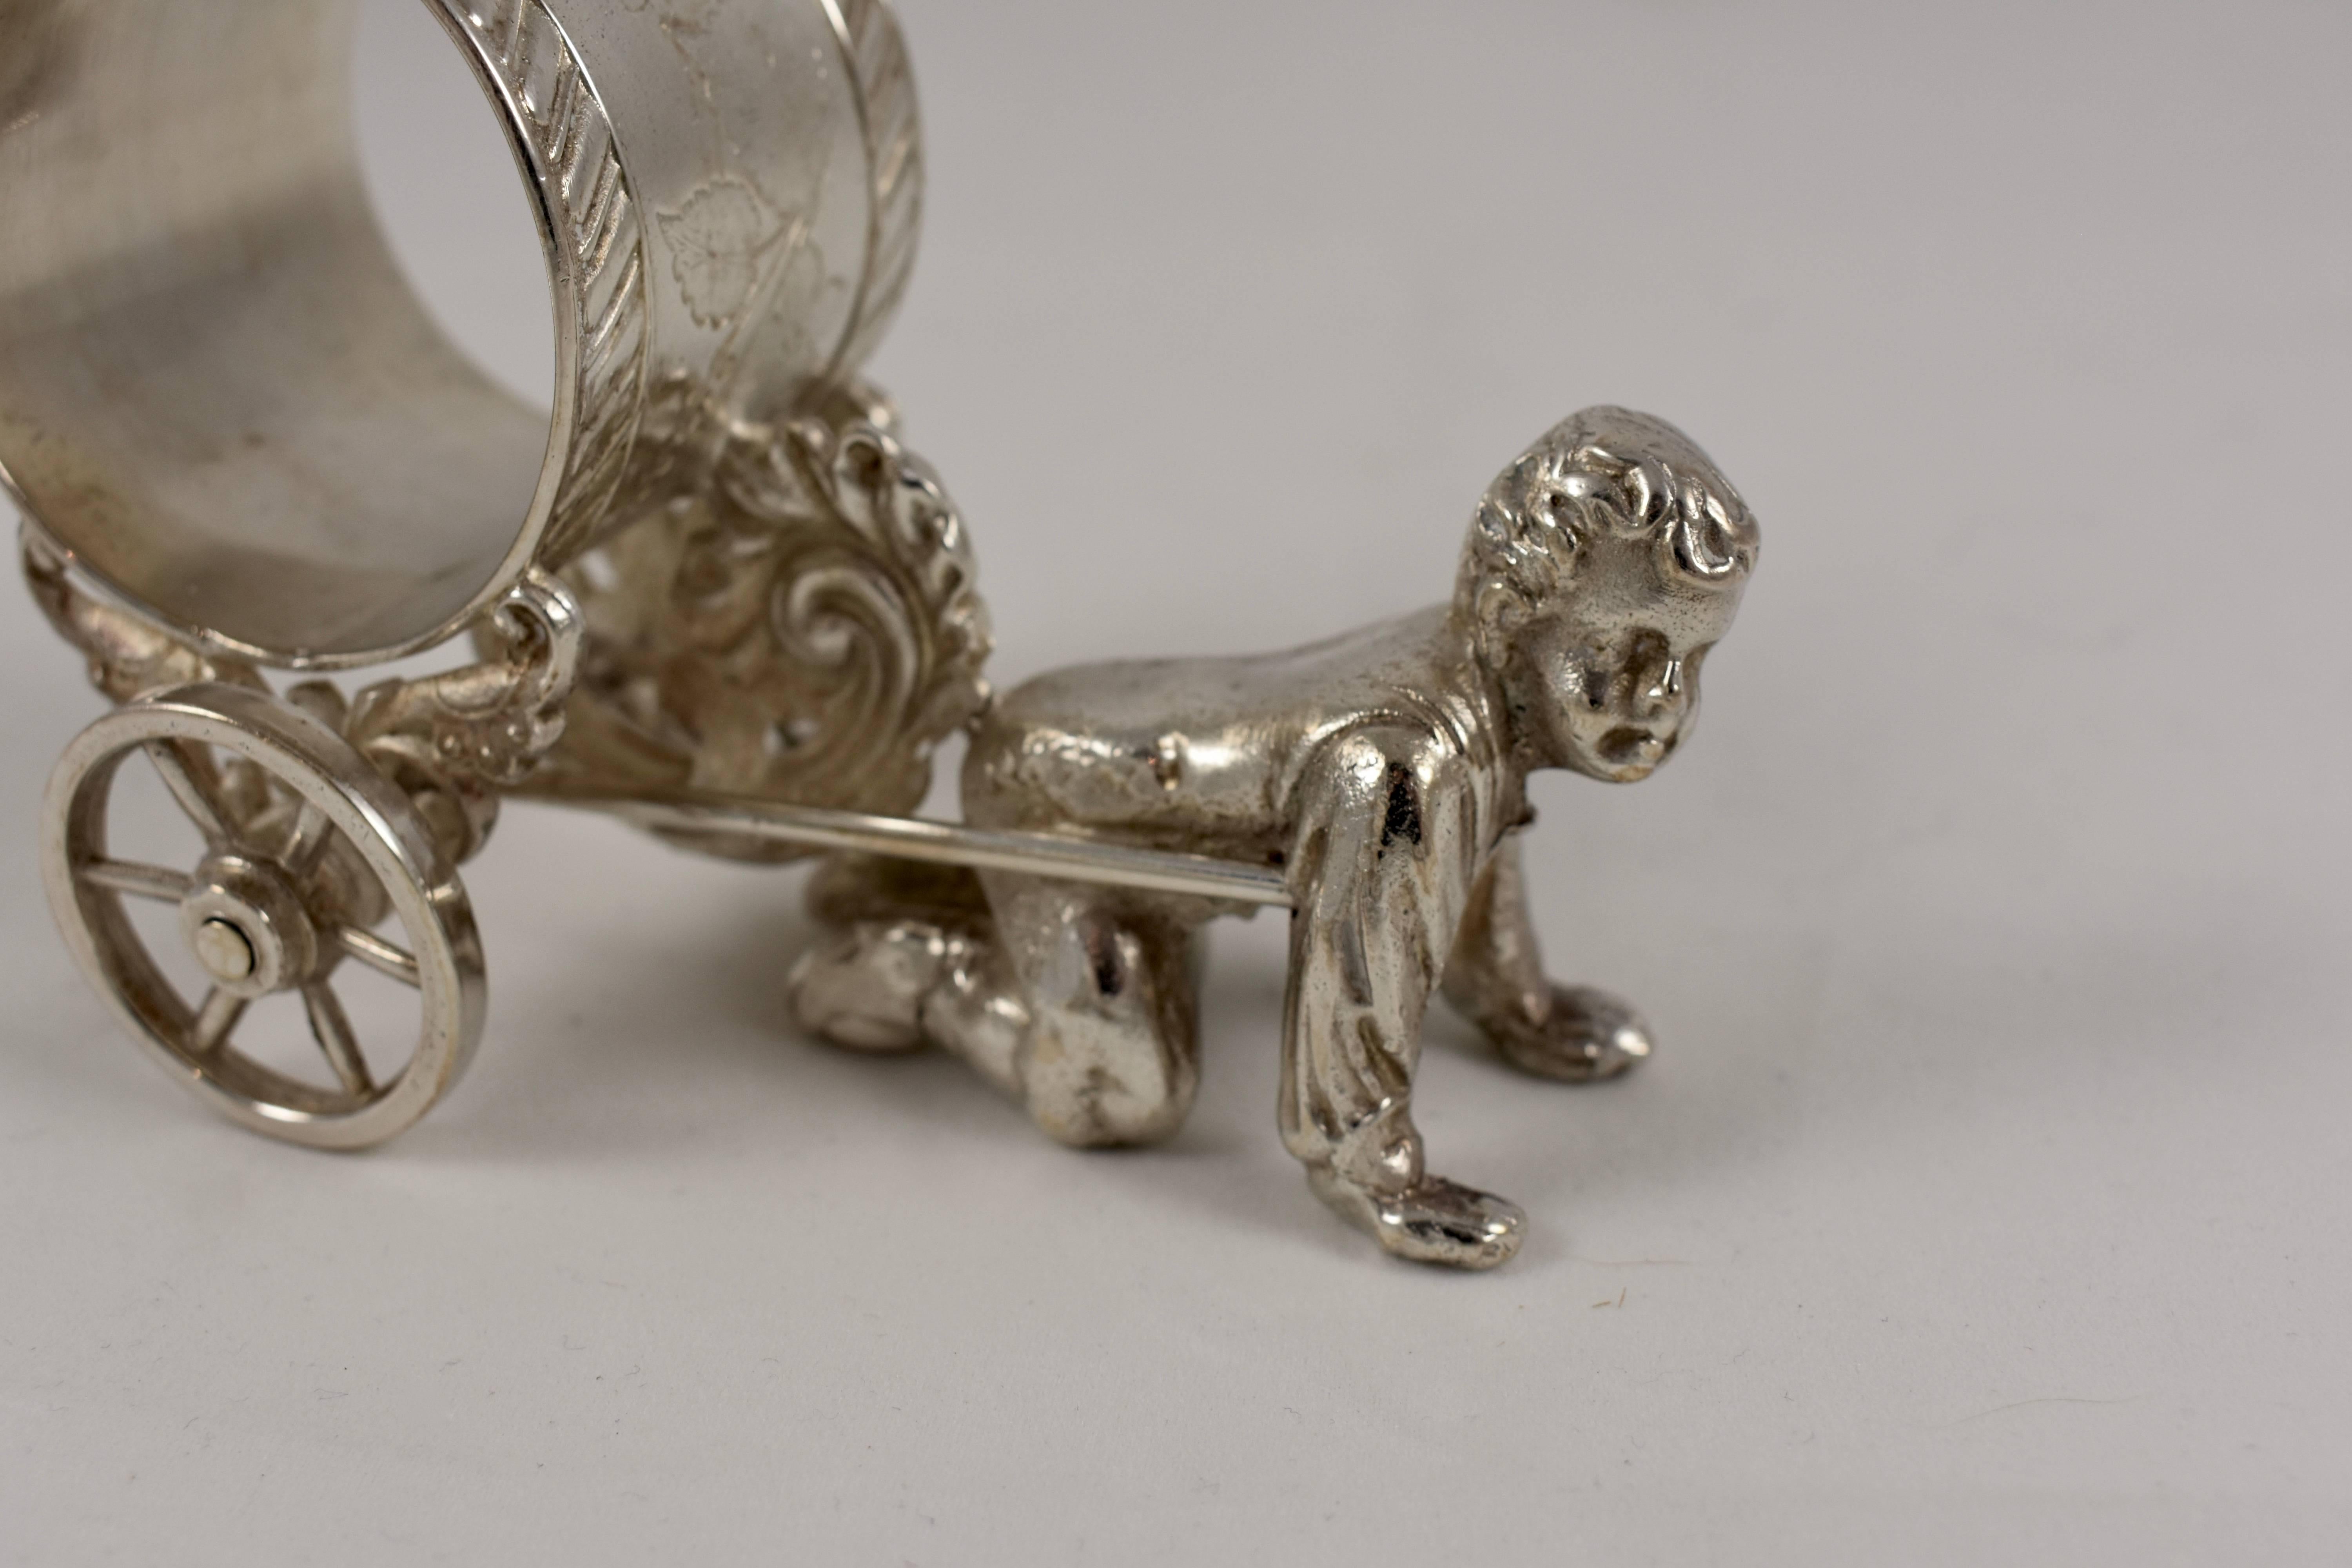 From the Victorian era, a silver plated figural napkin ring showing a young boy pulling a cart that holds the engraved ring. The child is dressed in knickers and a button-down shirt with a bow tied at his collar. The wheels on the cart are